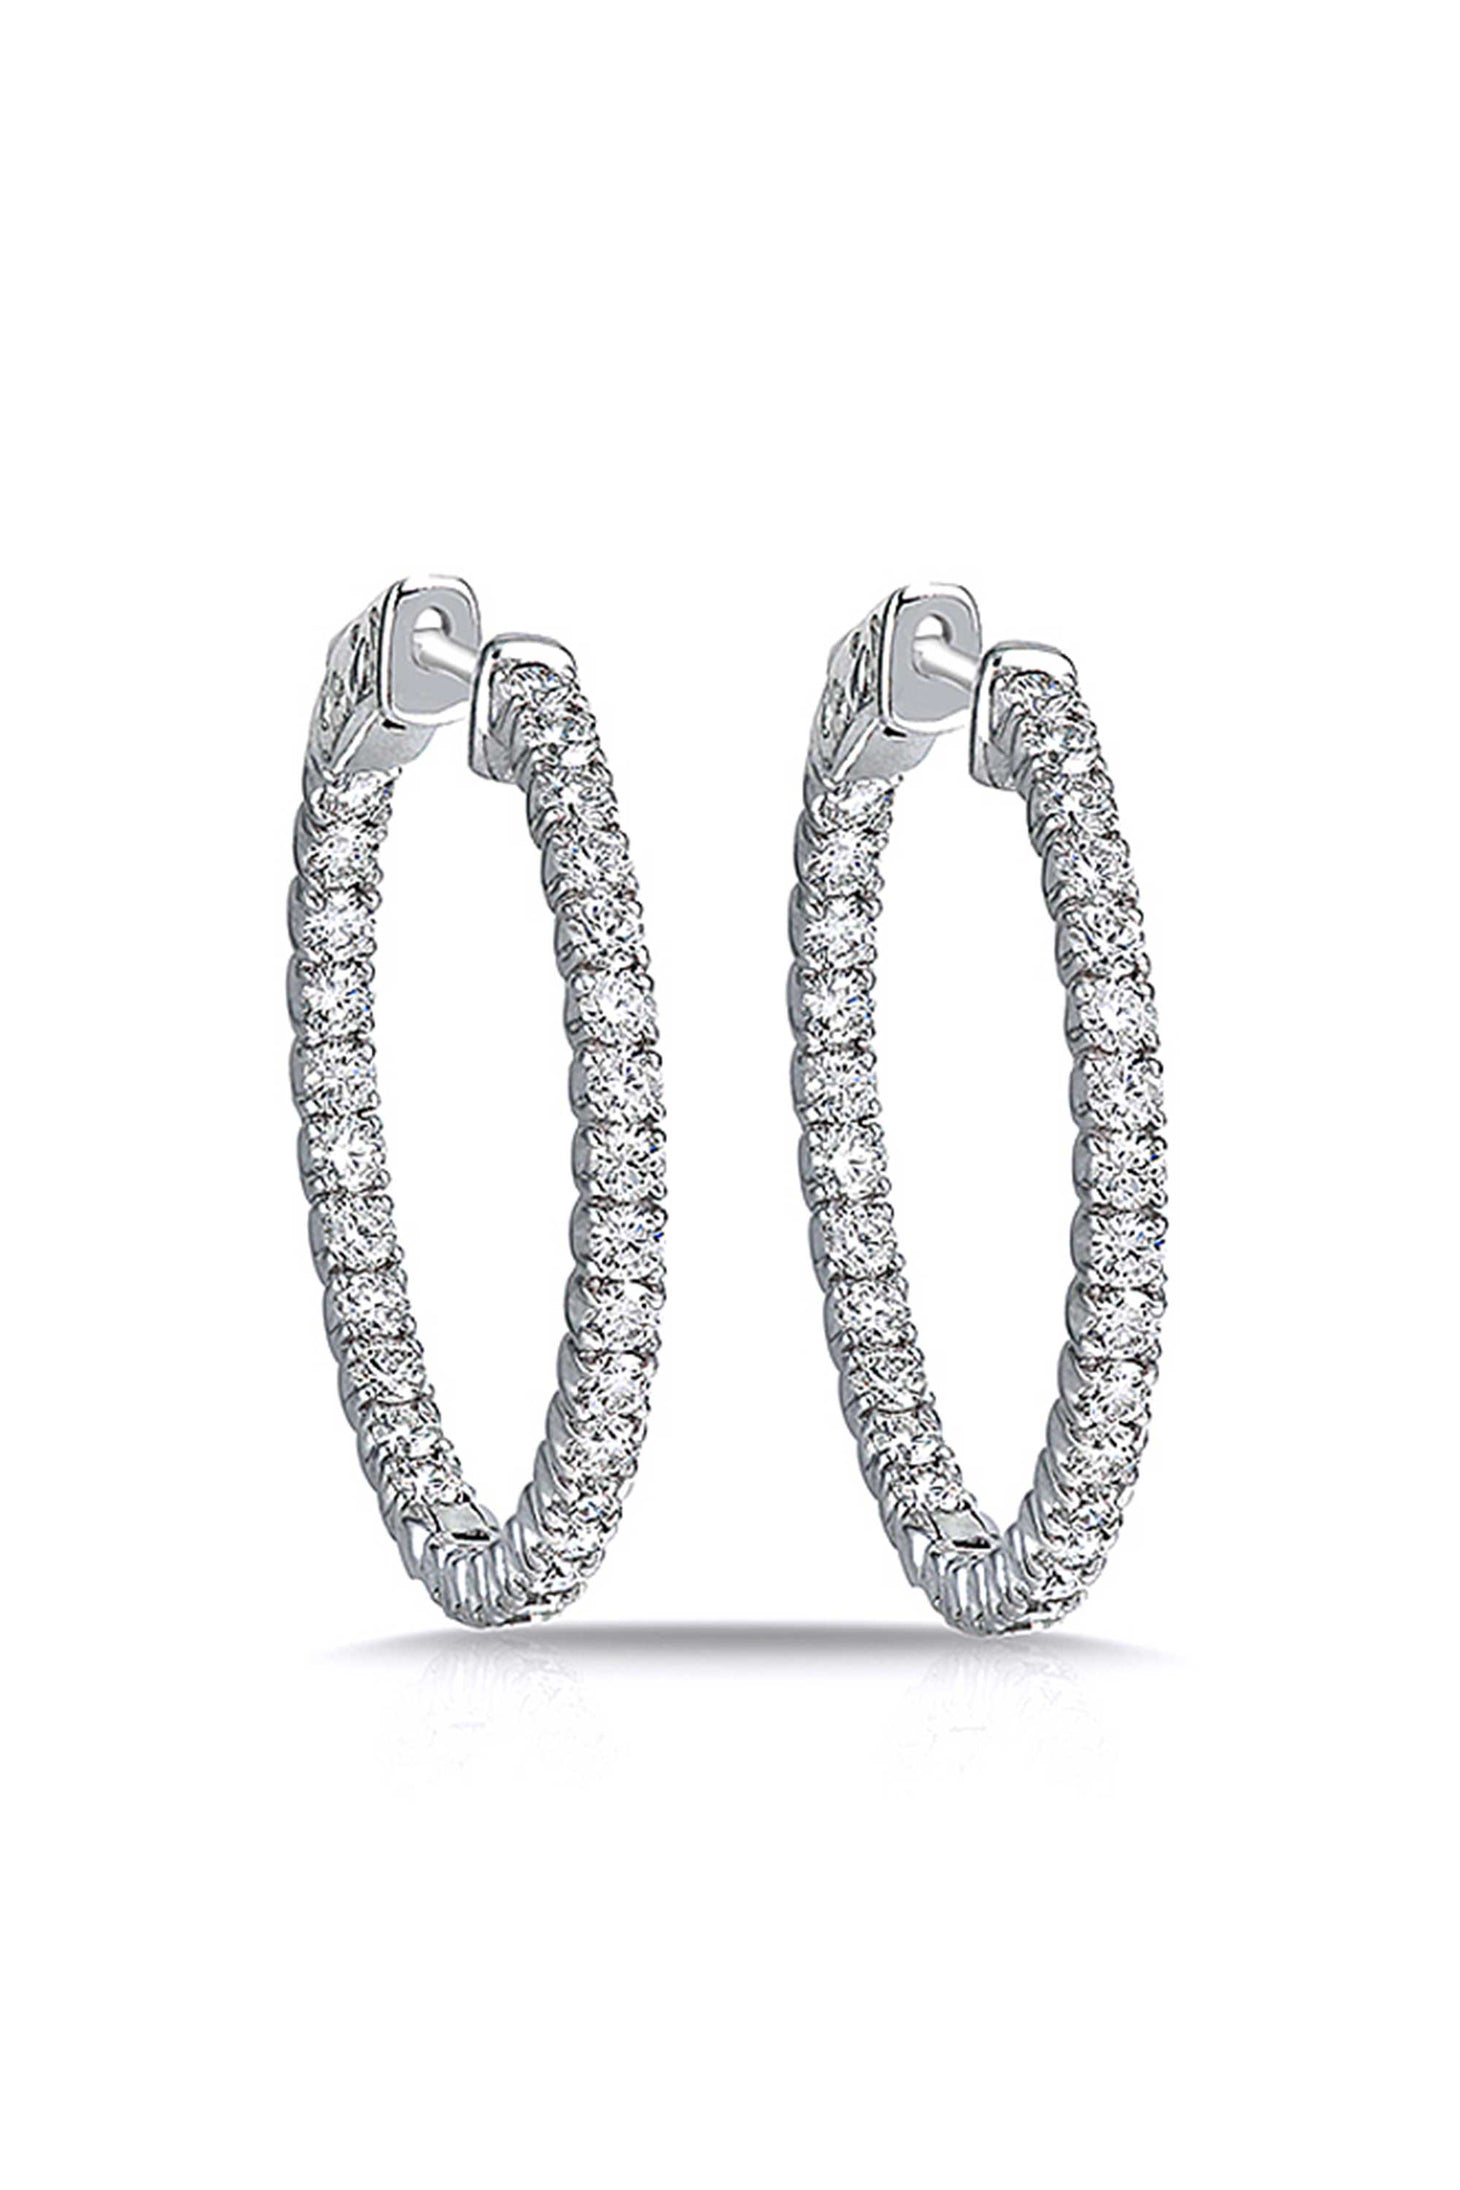 White Gold Inside Out Hoops